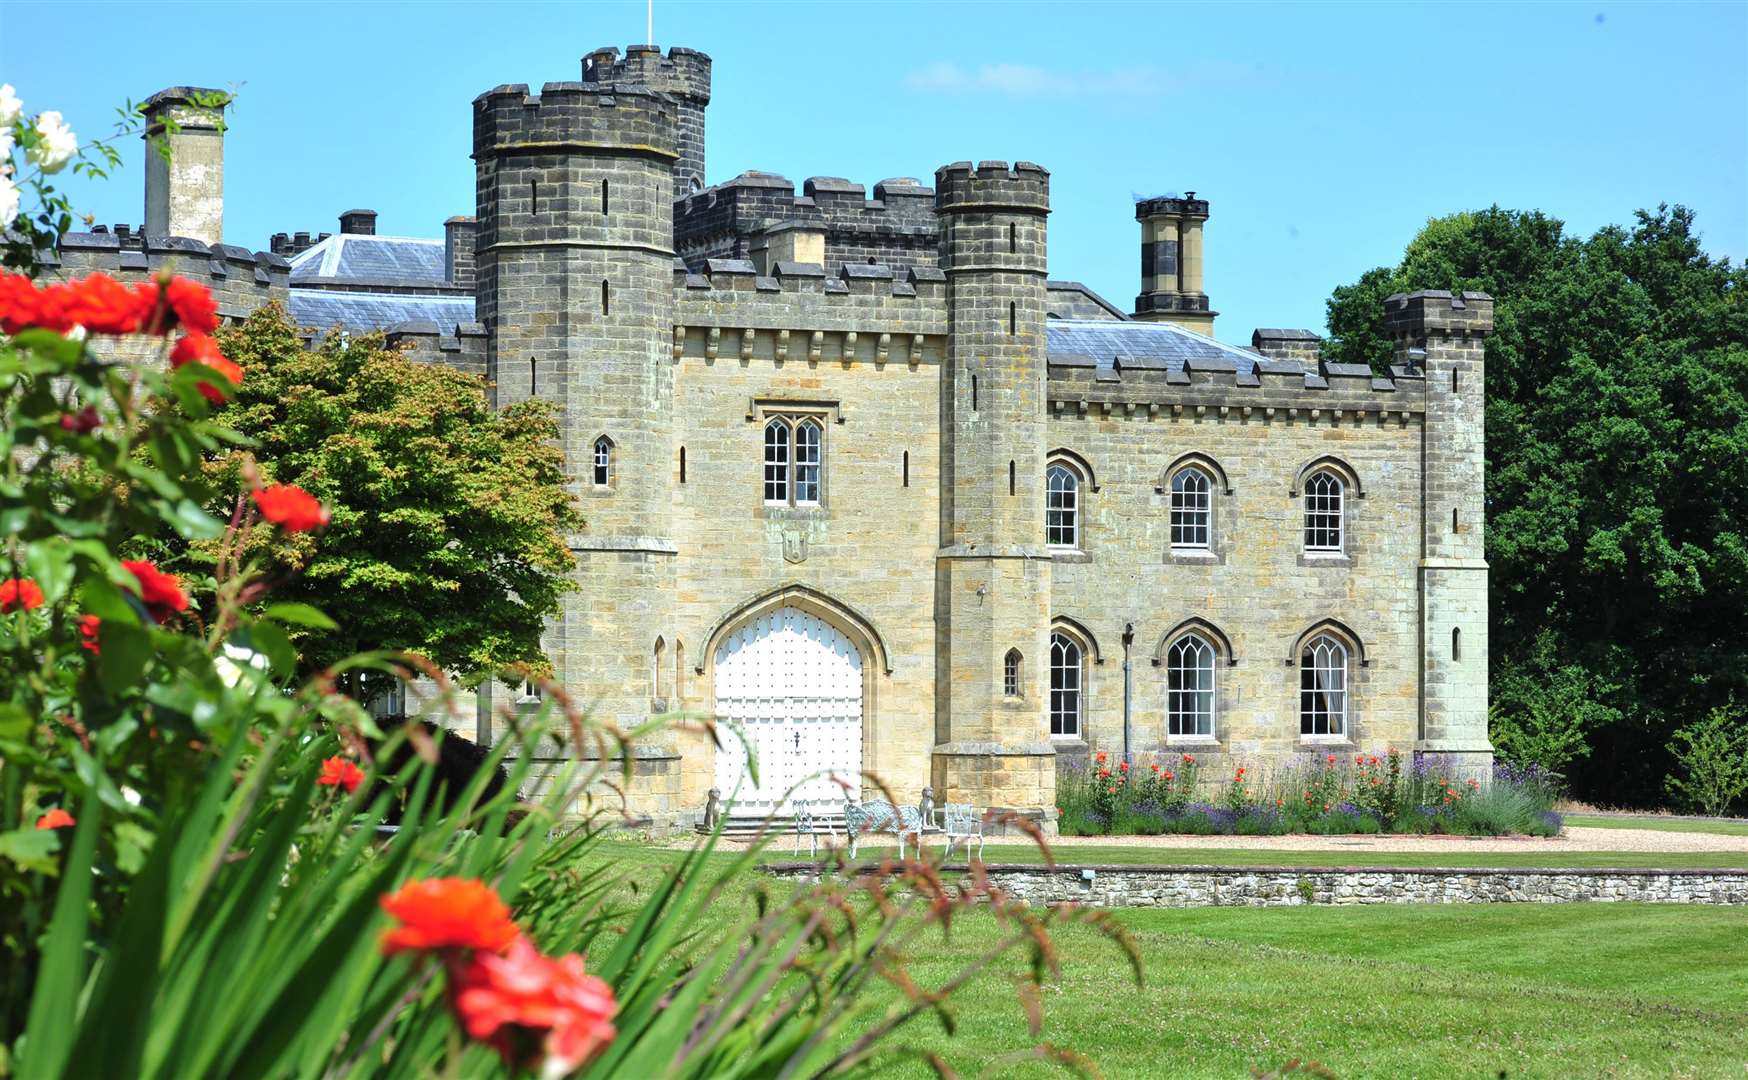 Chiddingstone Castle will be home to several days for literary lovers